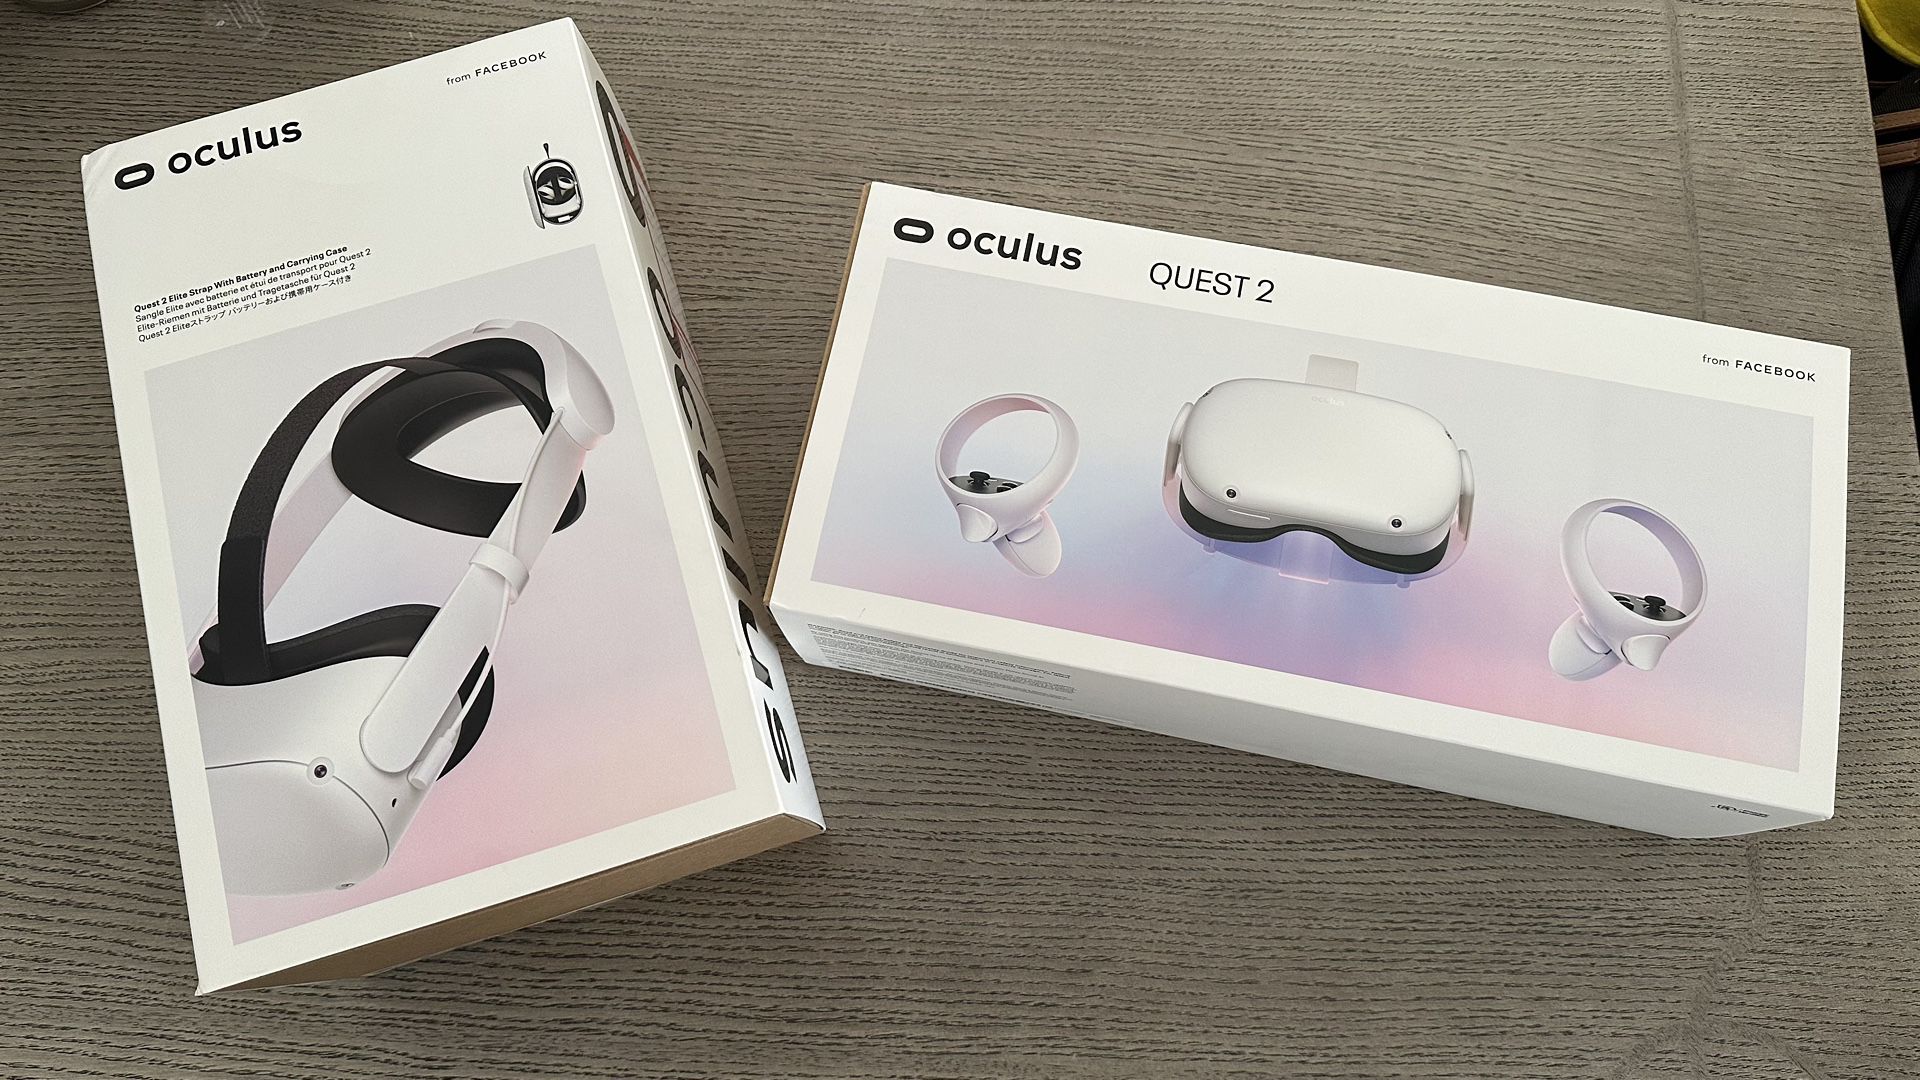 256gb Oculus Quest 2 with Quest 2 Elite Strap with carrying case for